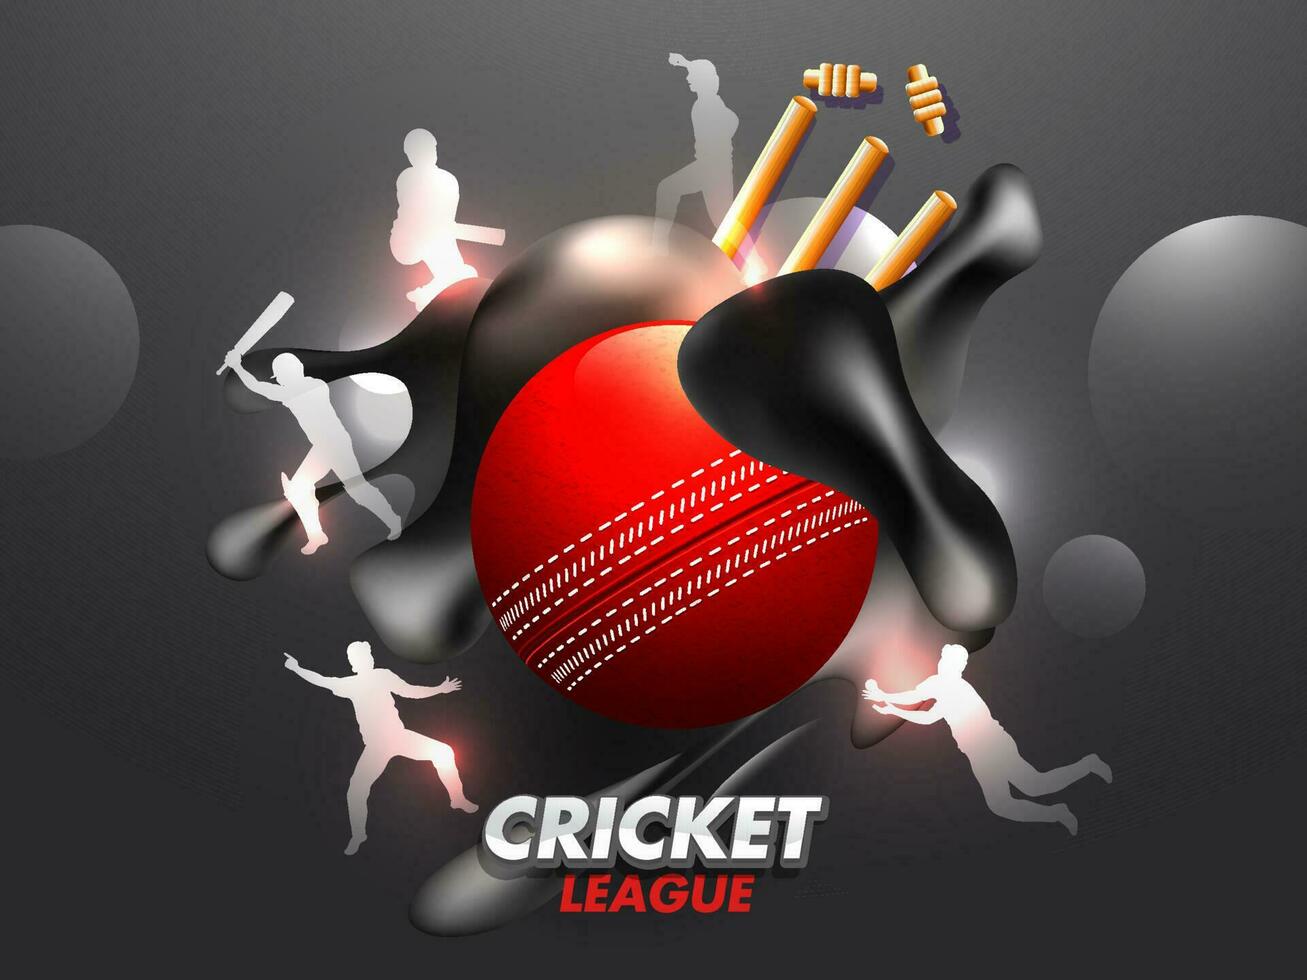 Shiny fluid color art on black background with silhouette of Cricket players in different pose for Cricket League poster or banner design. vector